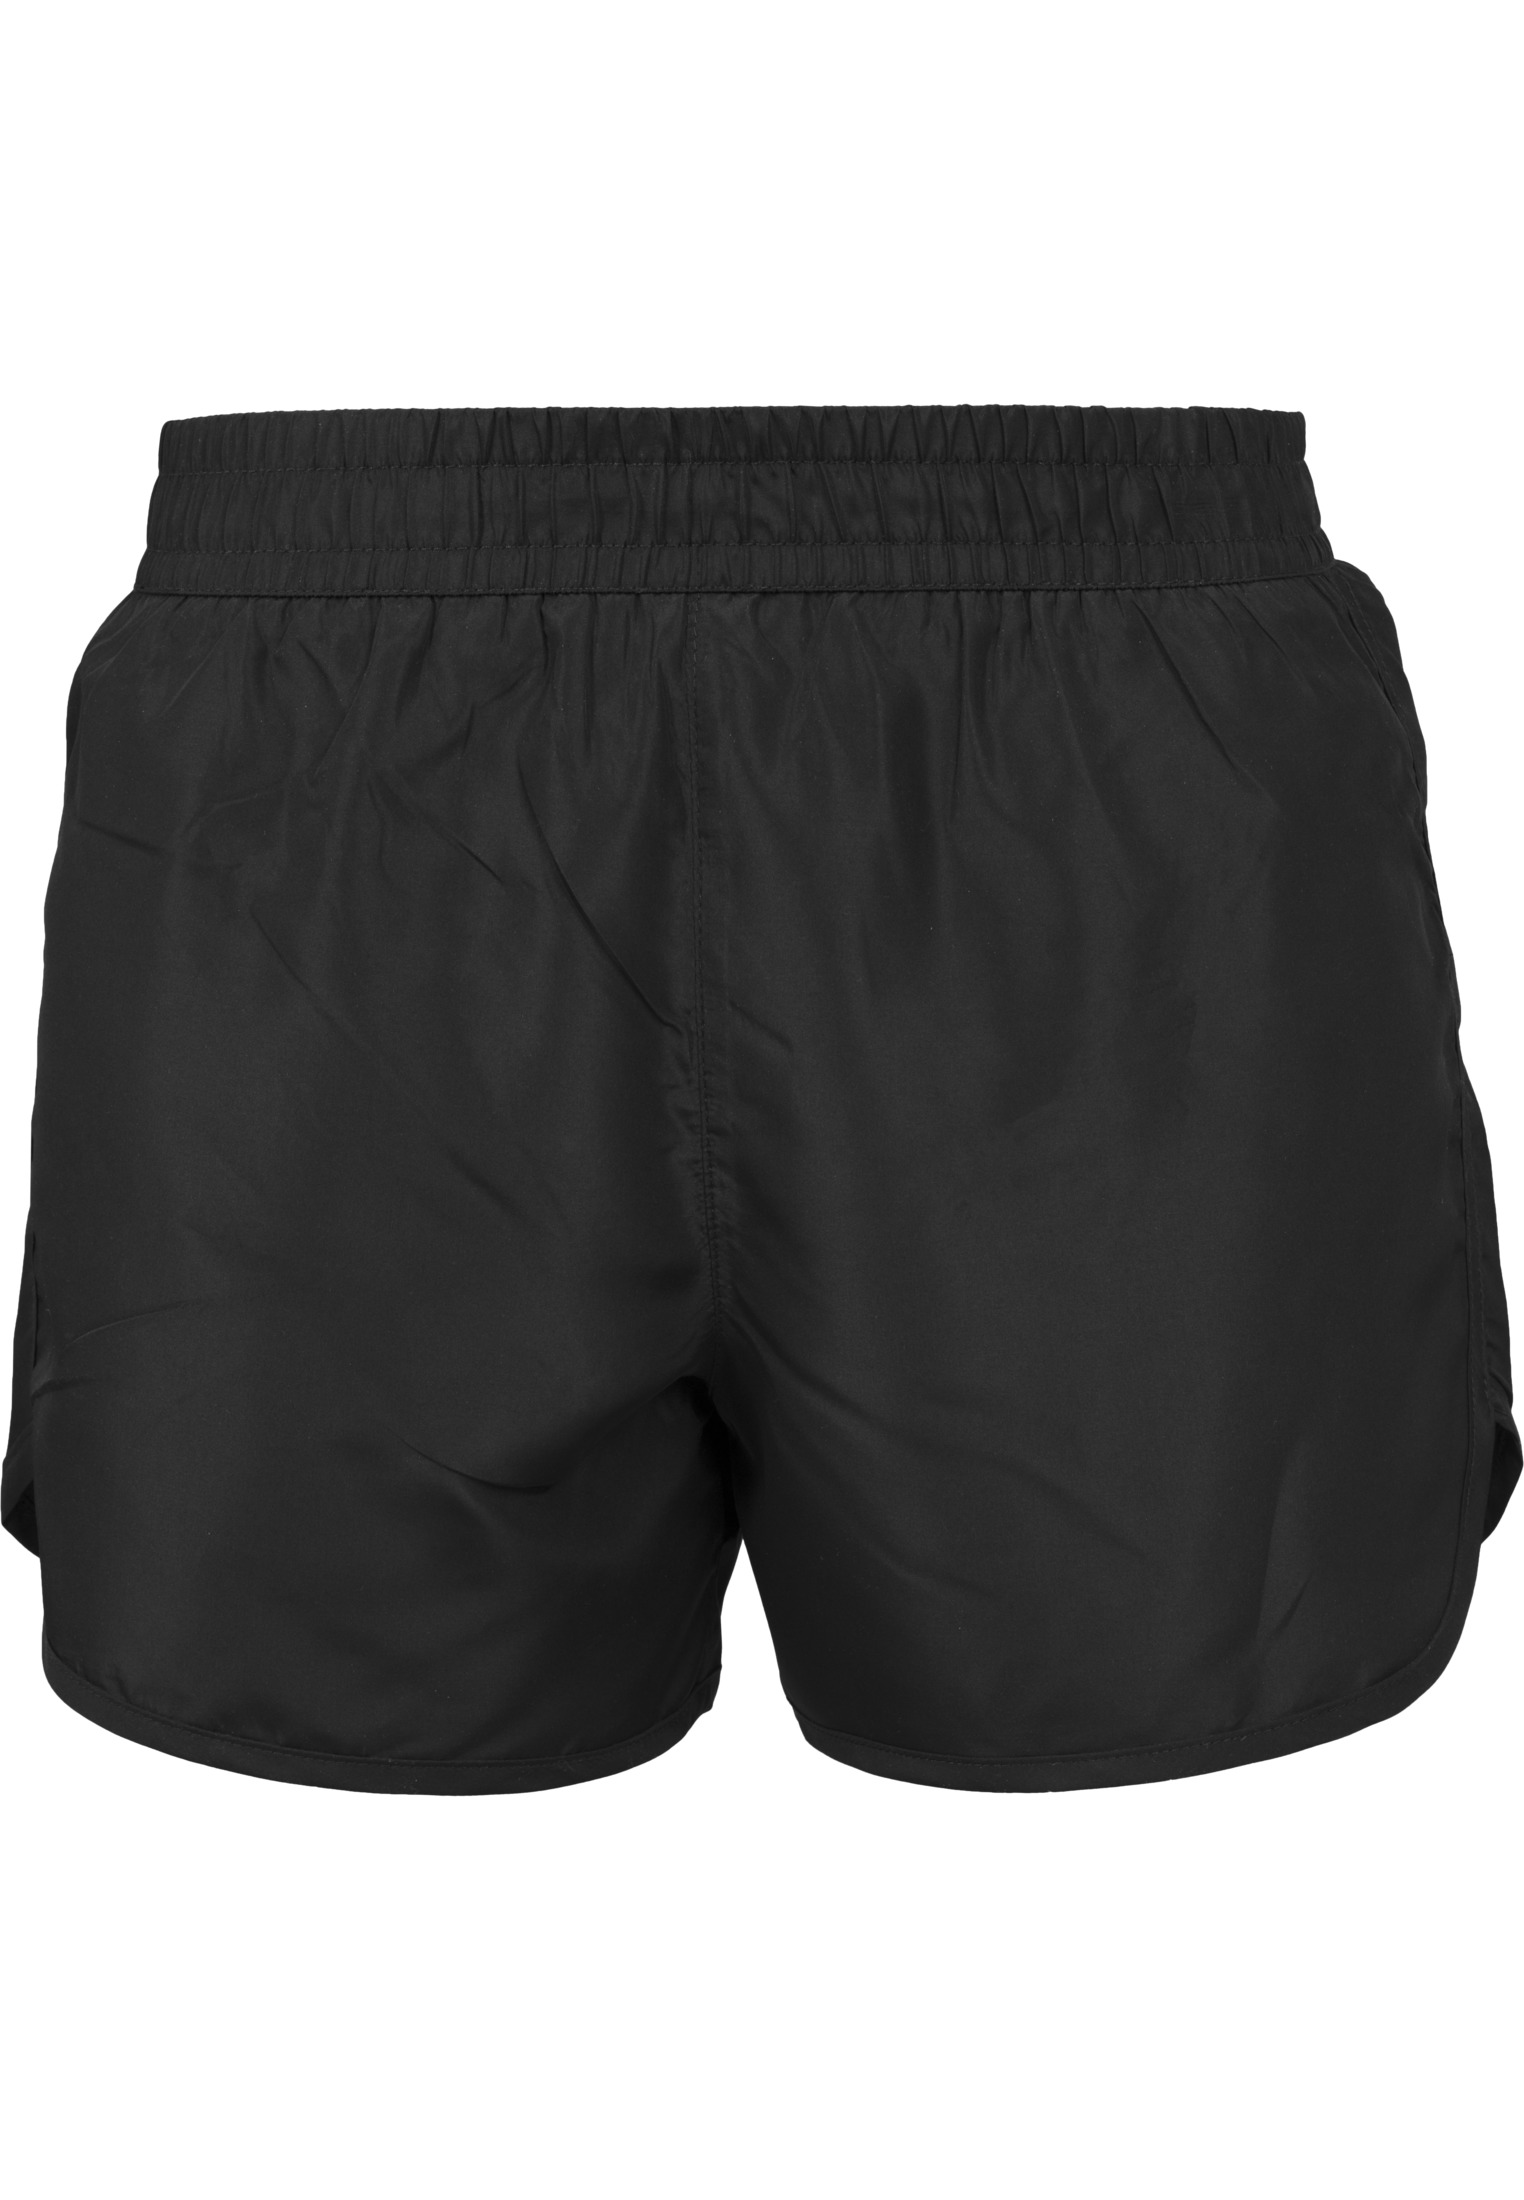 Athleisure Ladies Sports Shorts in Farbe black